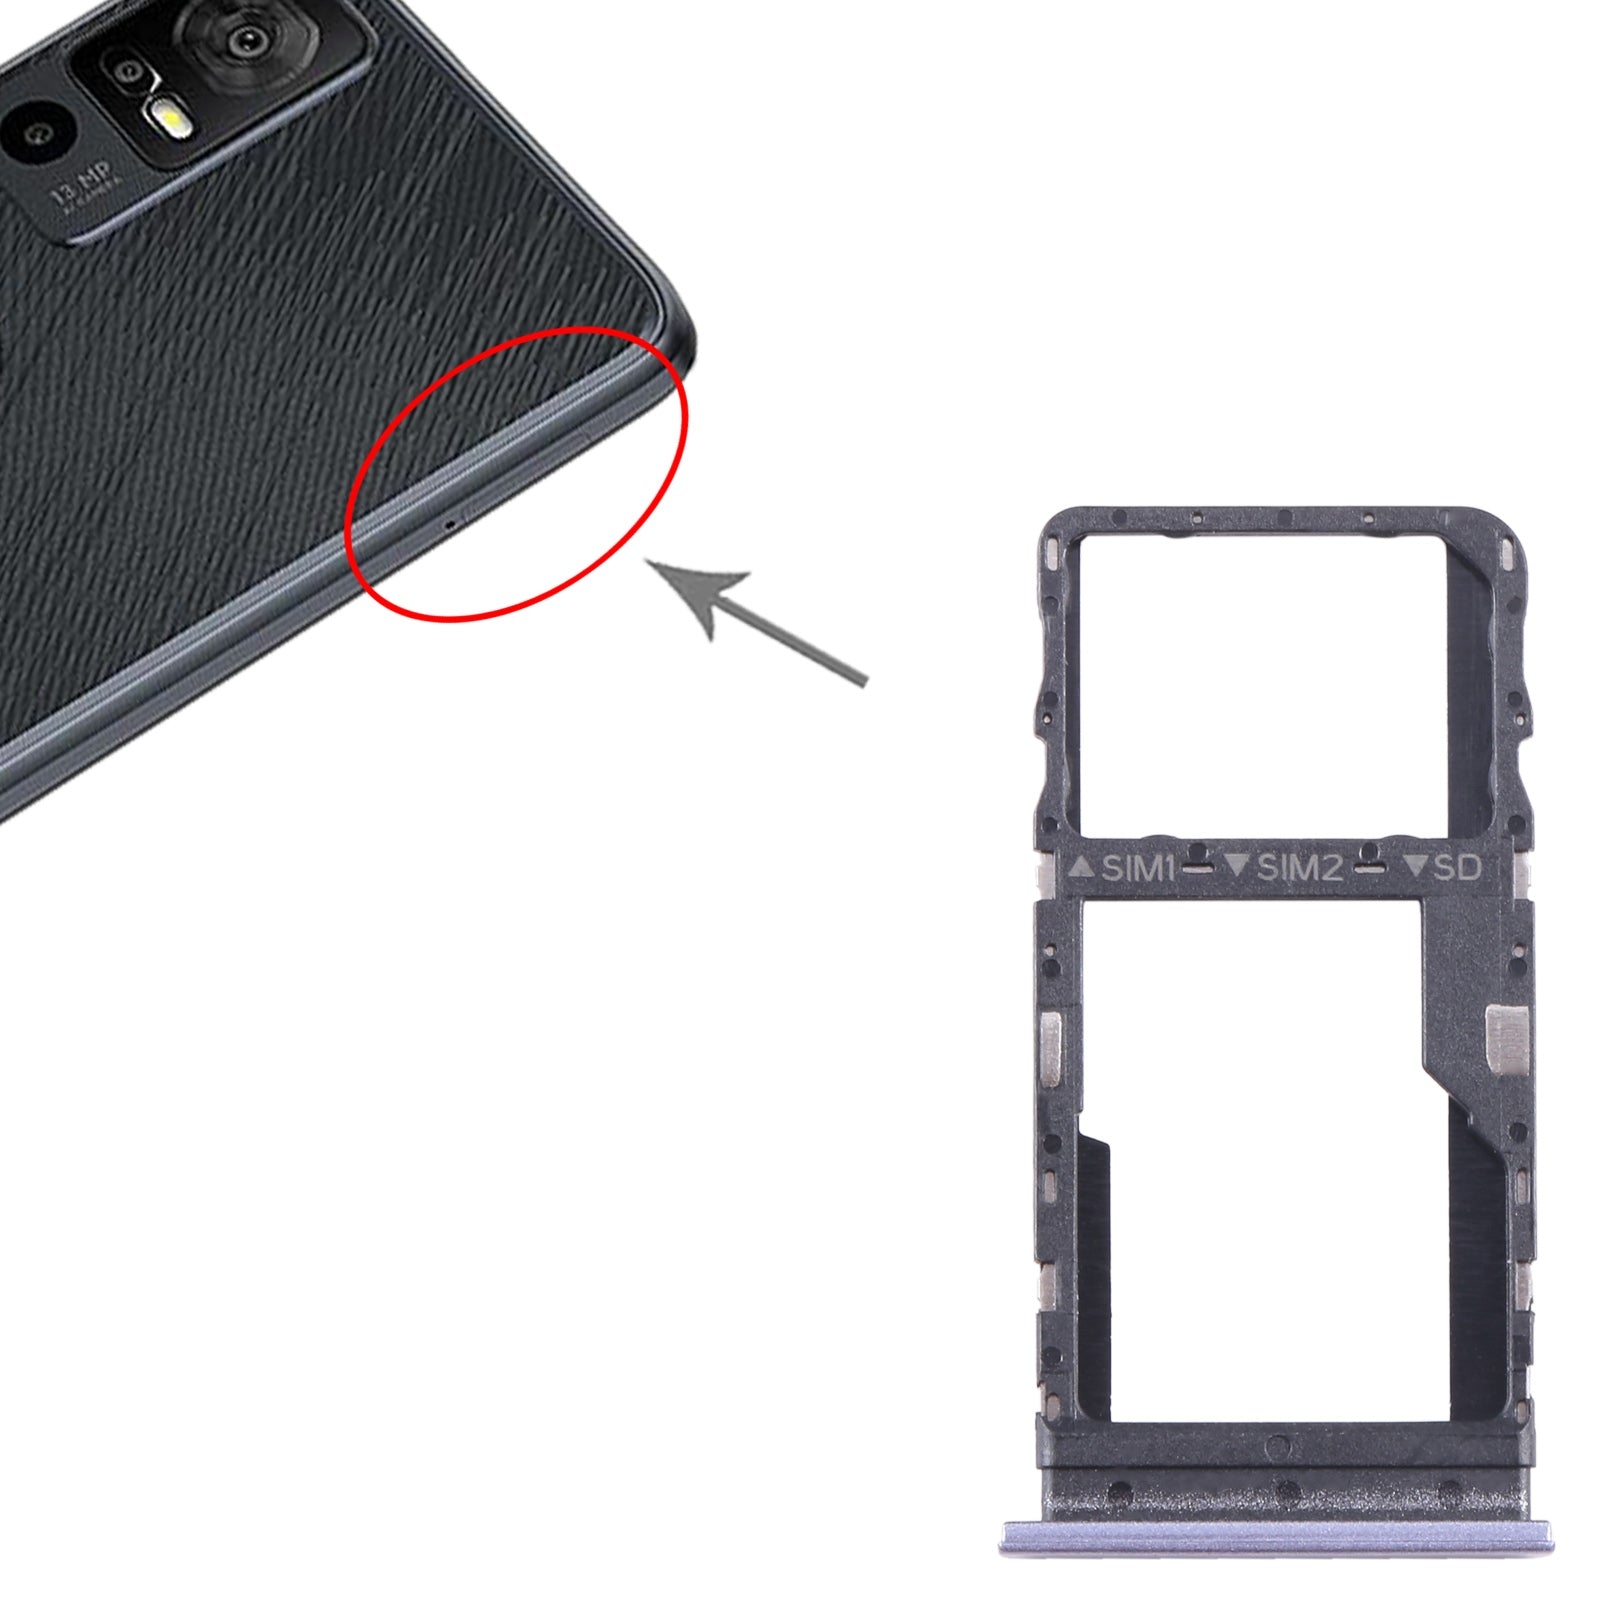 Plateau Support SIM / Micro SD TCL 40 R Violet